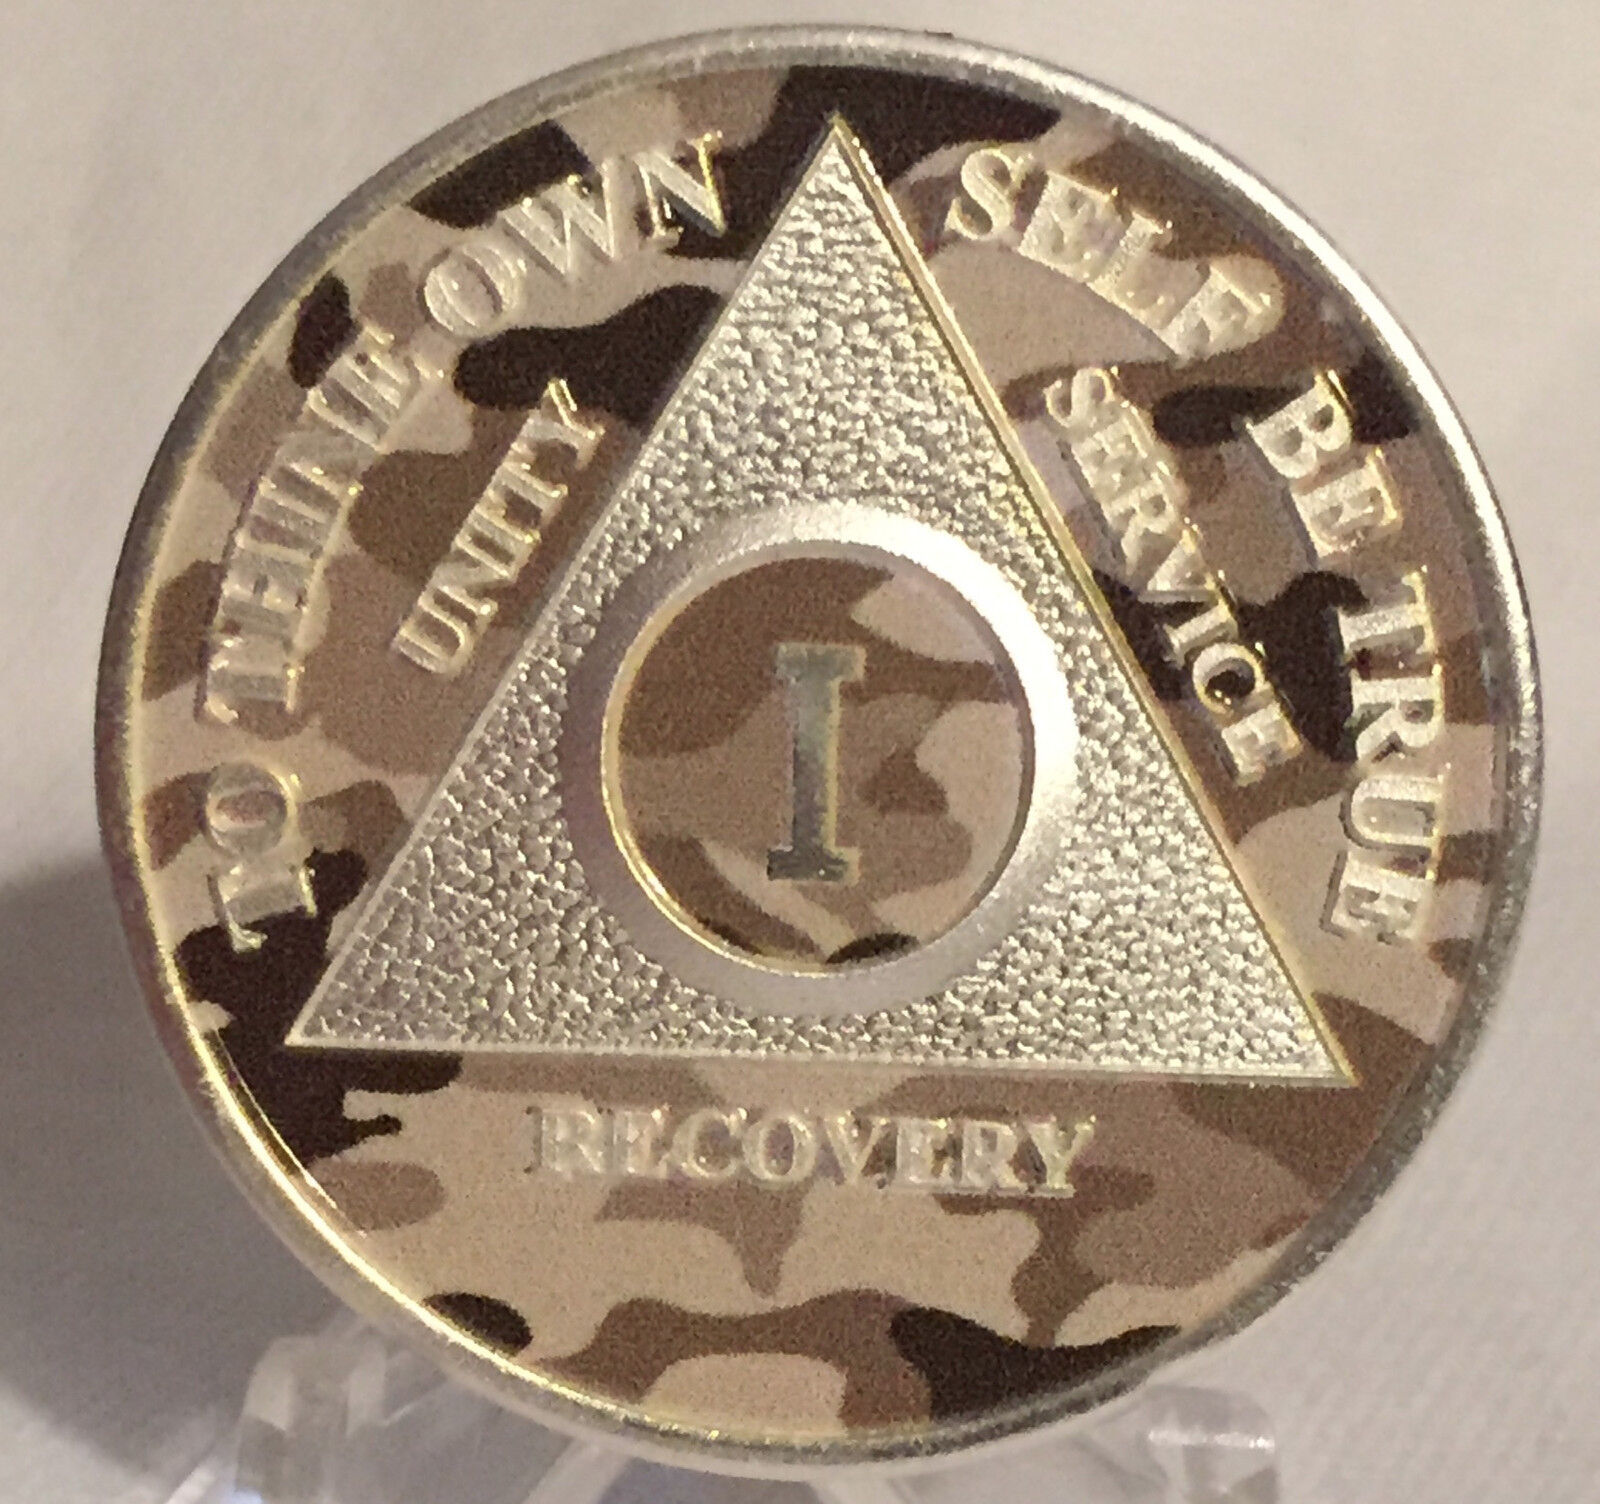 Camo & Silver Plated 1 Year Aa Chip Alcoholics Anonymous Medallion Coin Sobriety